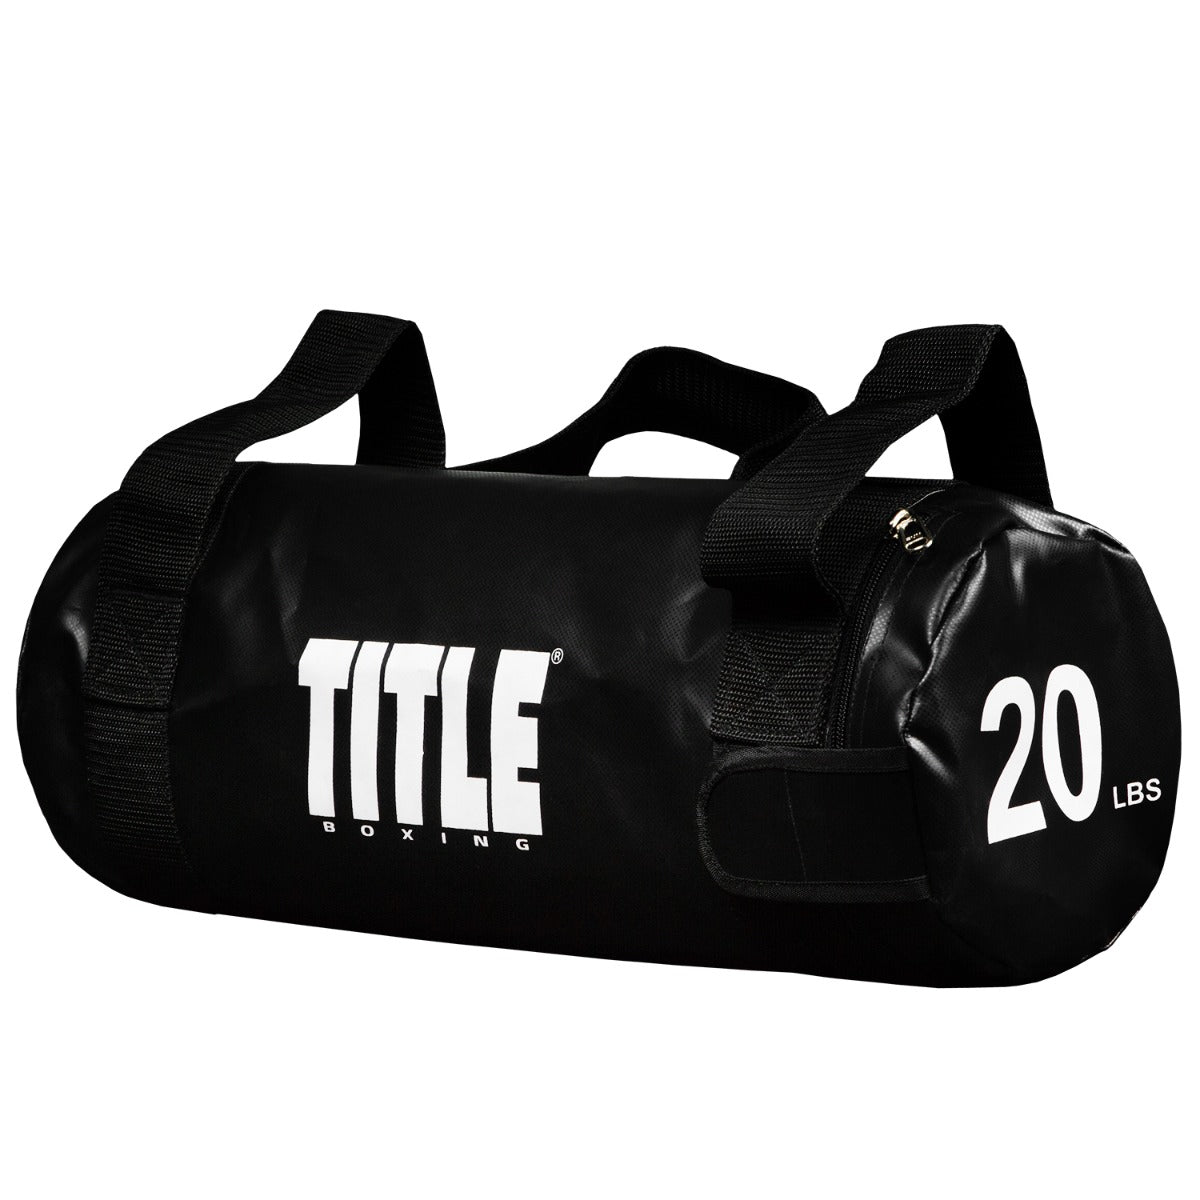 TITLE Ultimate Weight Bag 20 lbs